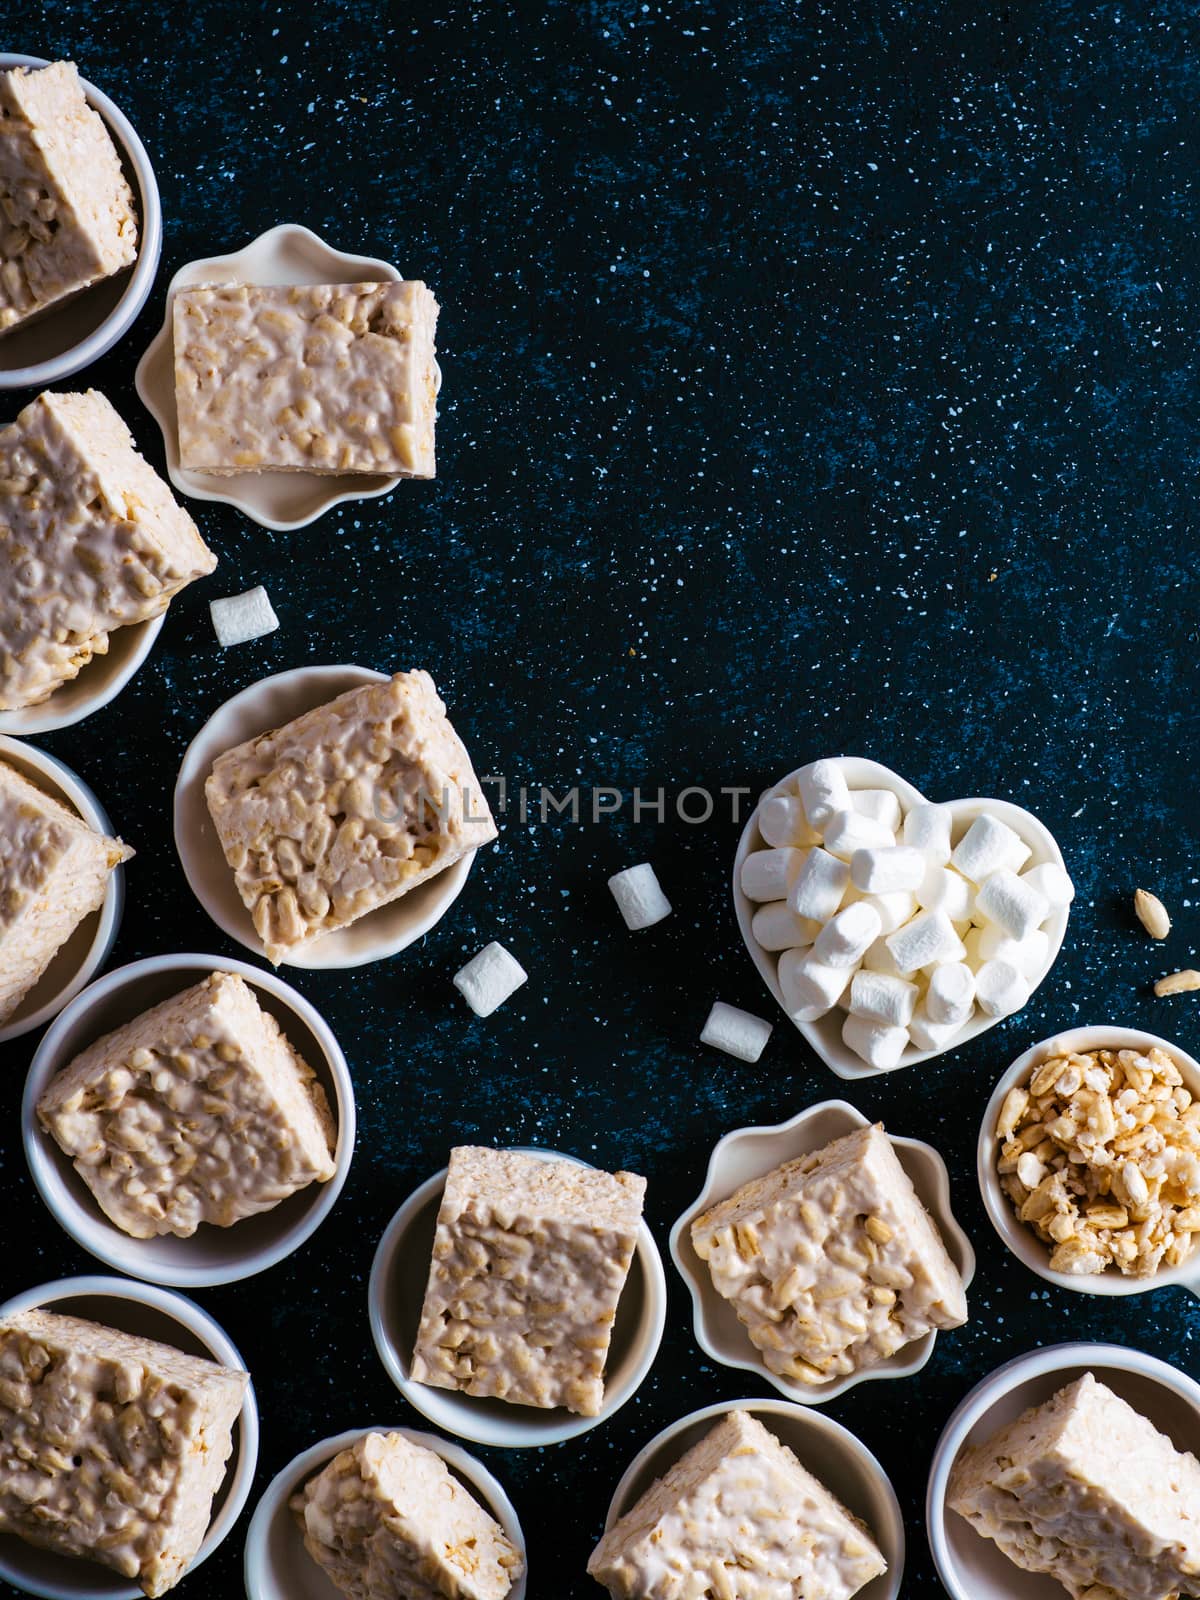 Homemade square bars of Marshmallow and crispy rice and ingredients on dark blue background. American dessert with marshmallow and crispy rice. Top view. Copy space